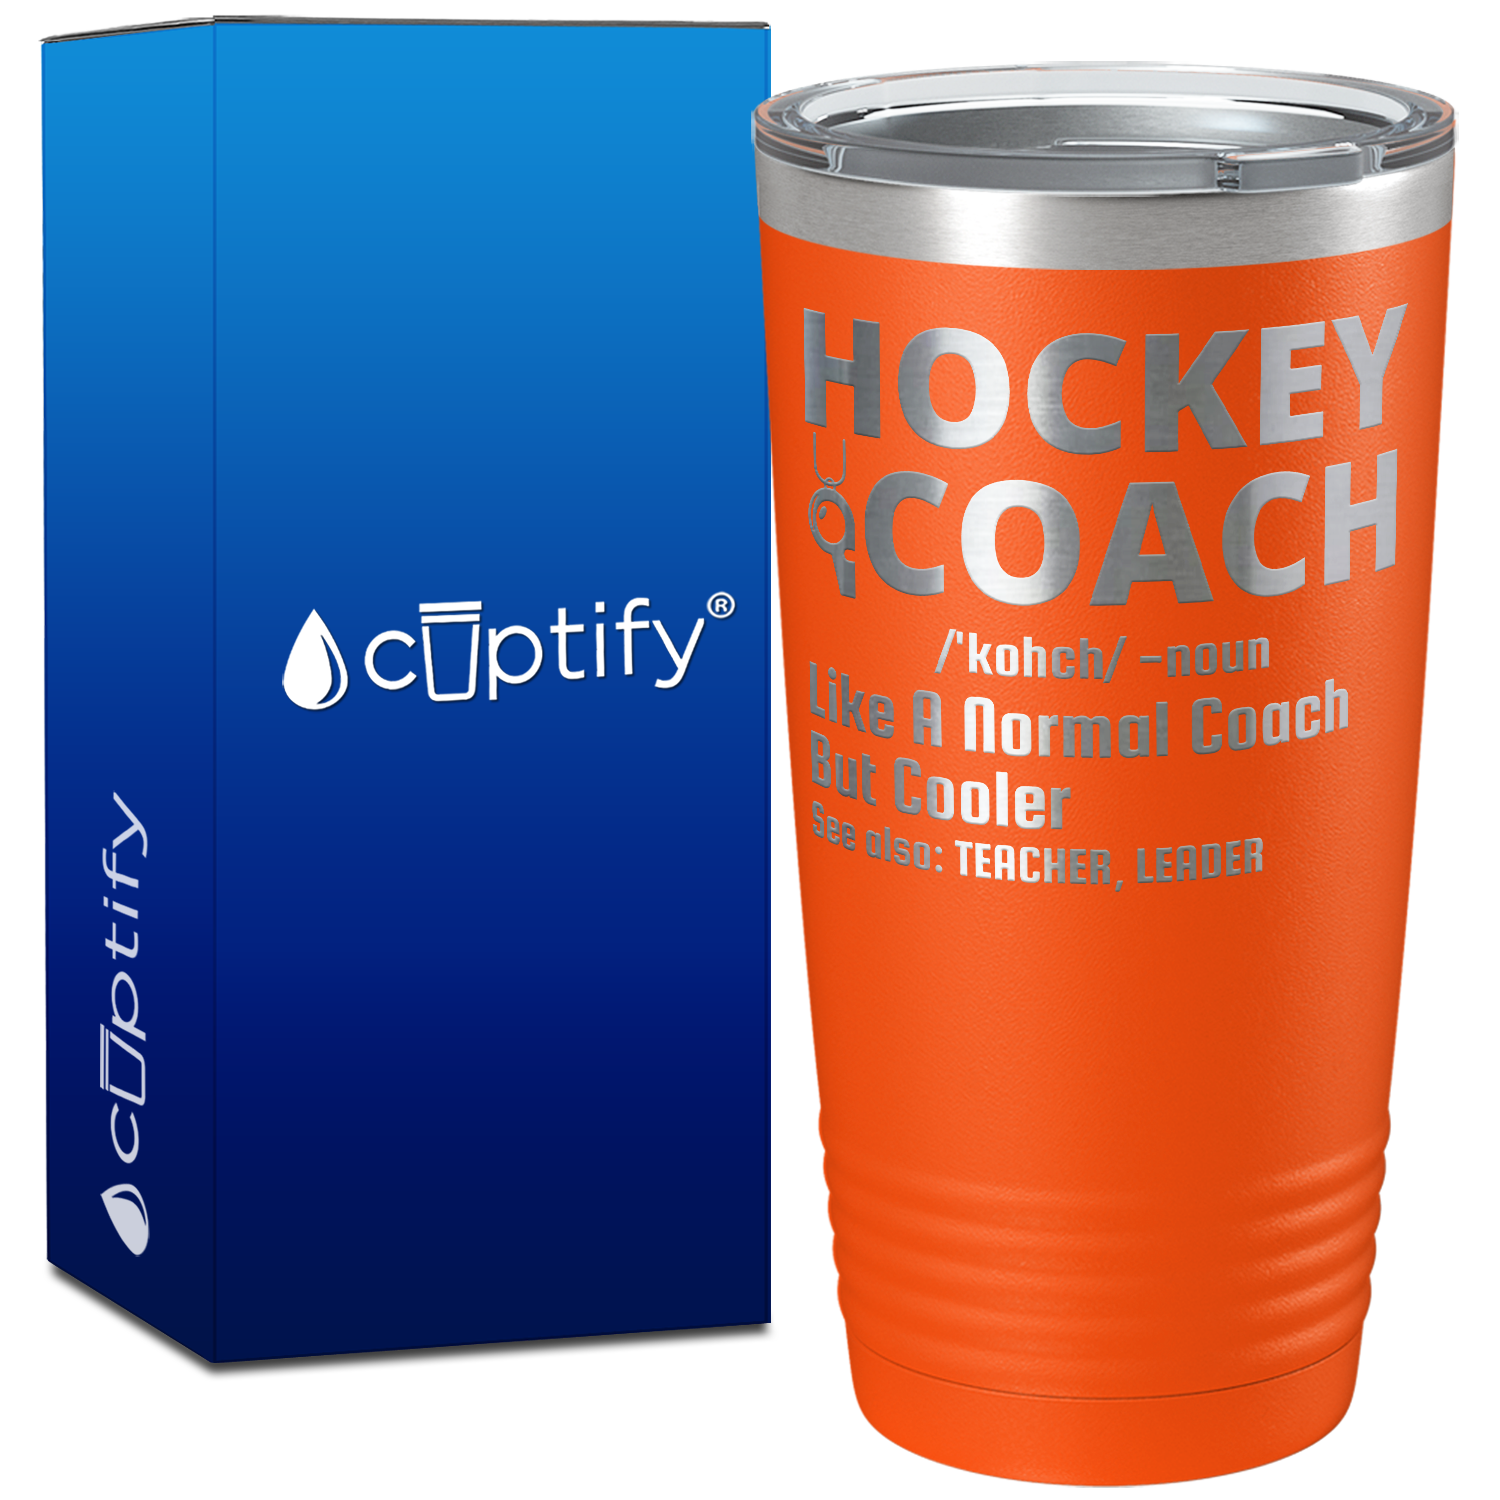 Hockey Coach Like a Normal Coach But Cooler on 20oz Tumbler